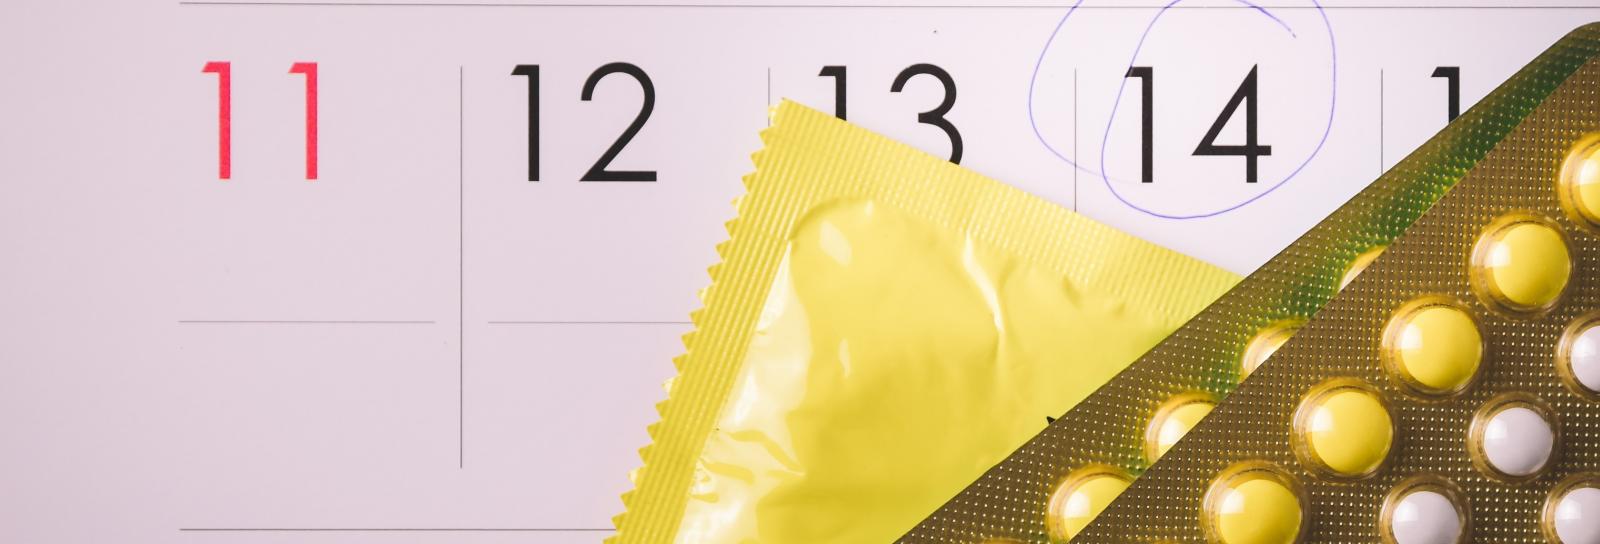 calendar with the 14th circled and packs of oral contraceptives